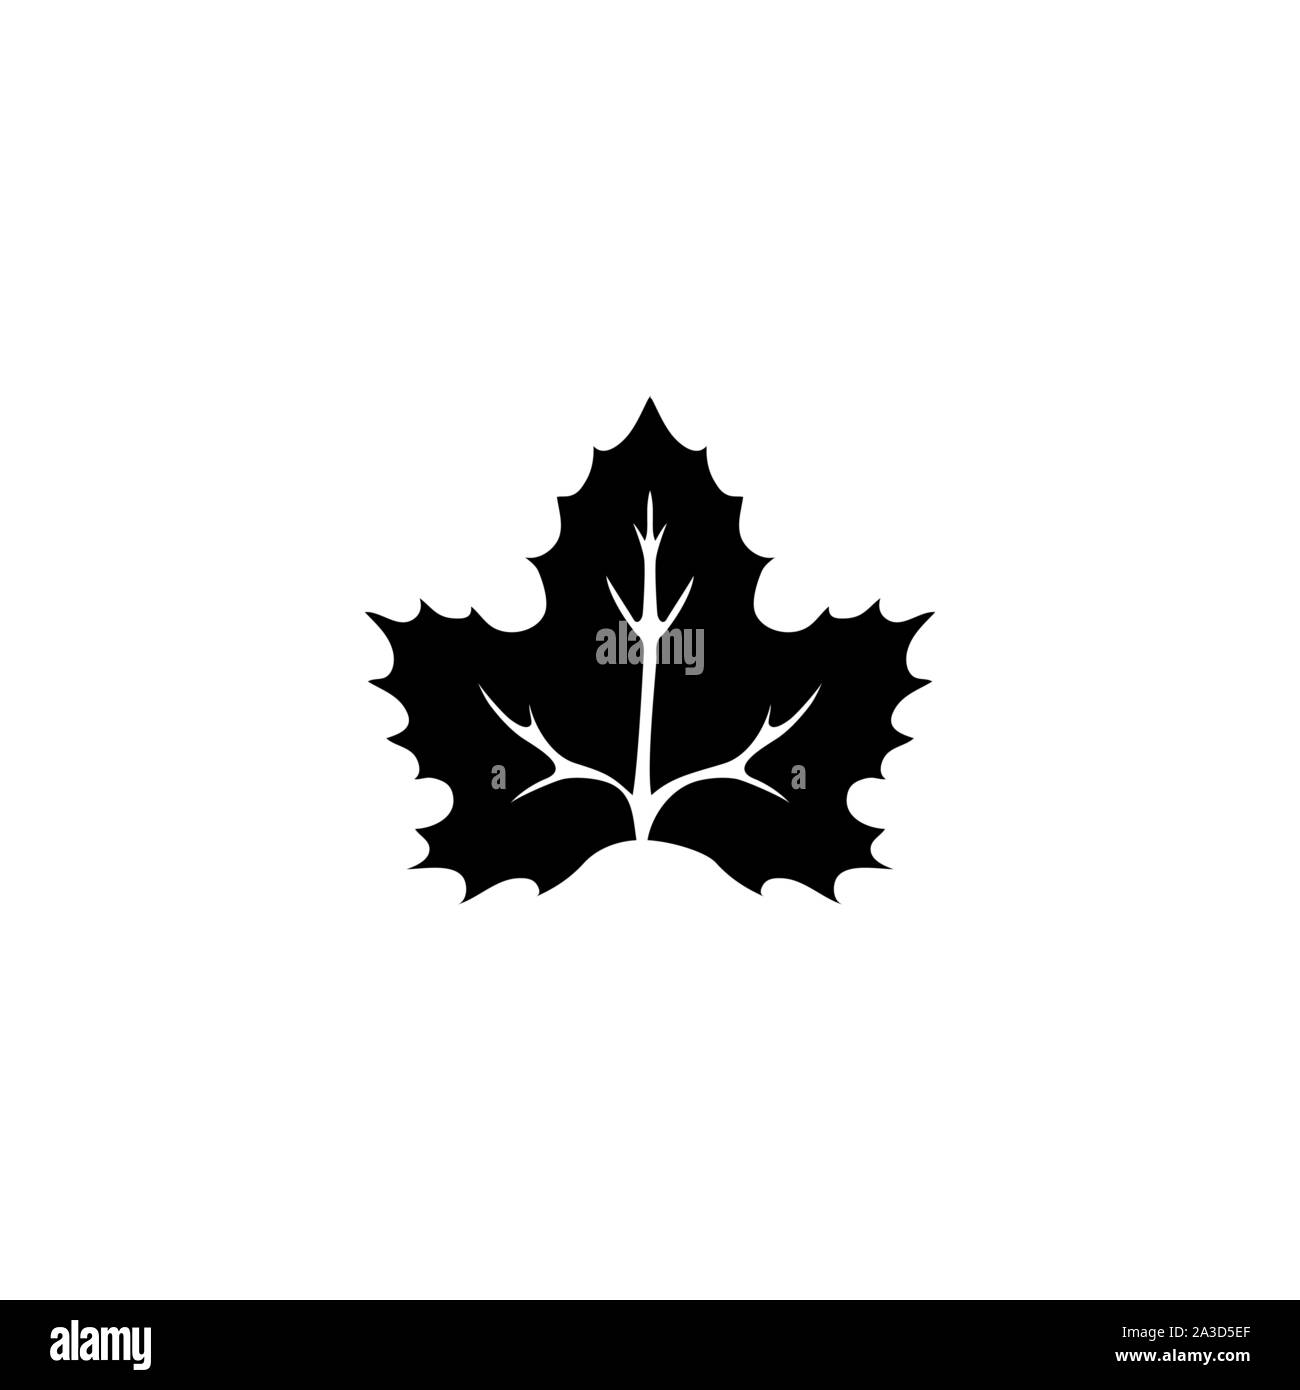 Canadian National Maple Leaf. Flat Vector Icon illustration. Simple black symbol on white background. Canadian National Maple Leaf sign design templat Stock Vector